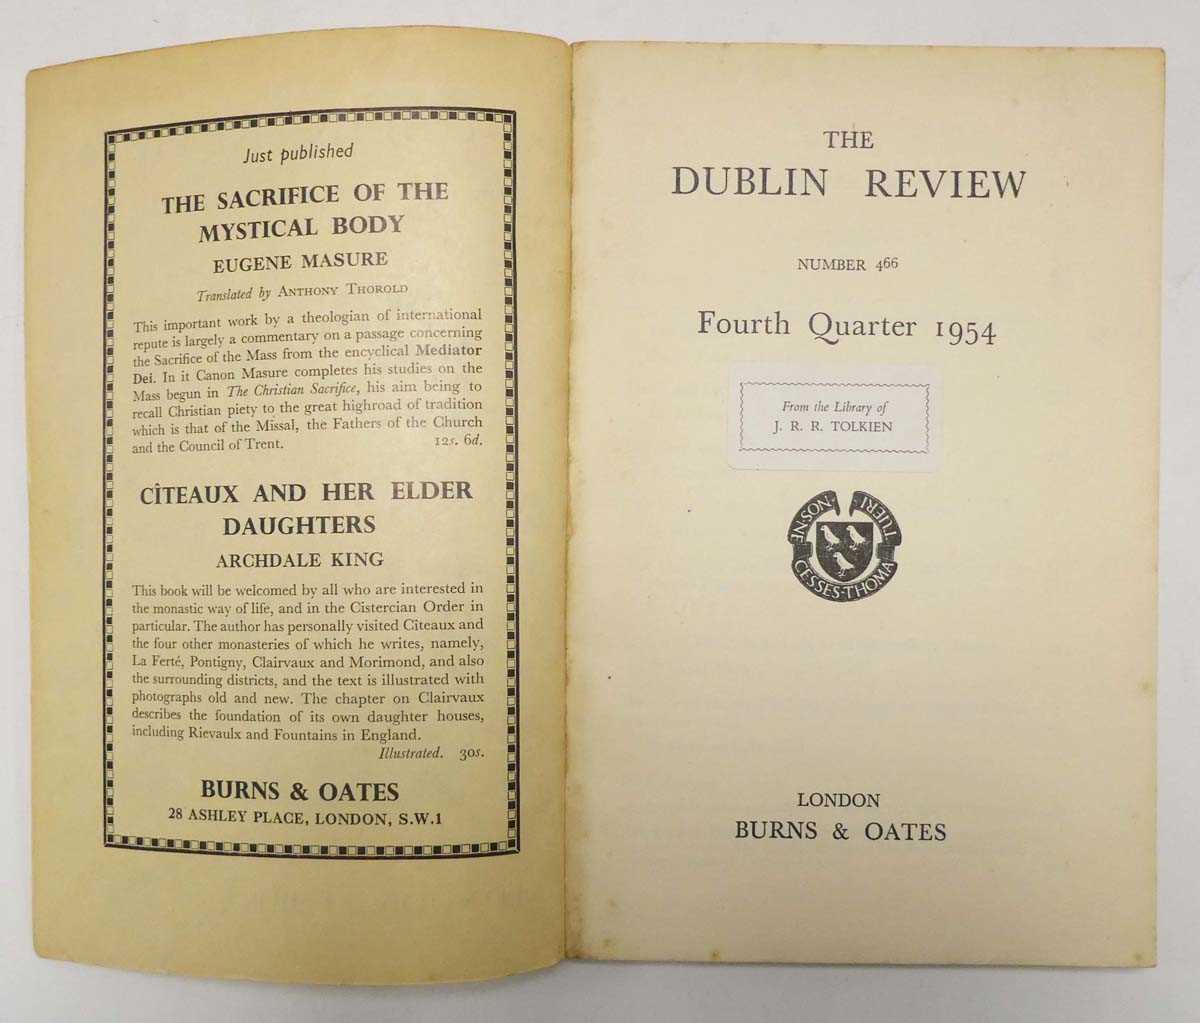 The Dublin Review, Fourth Quarter, 1954. London : Burns & Oates. This copy has Tolkien's initials